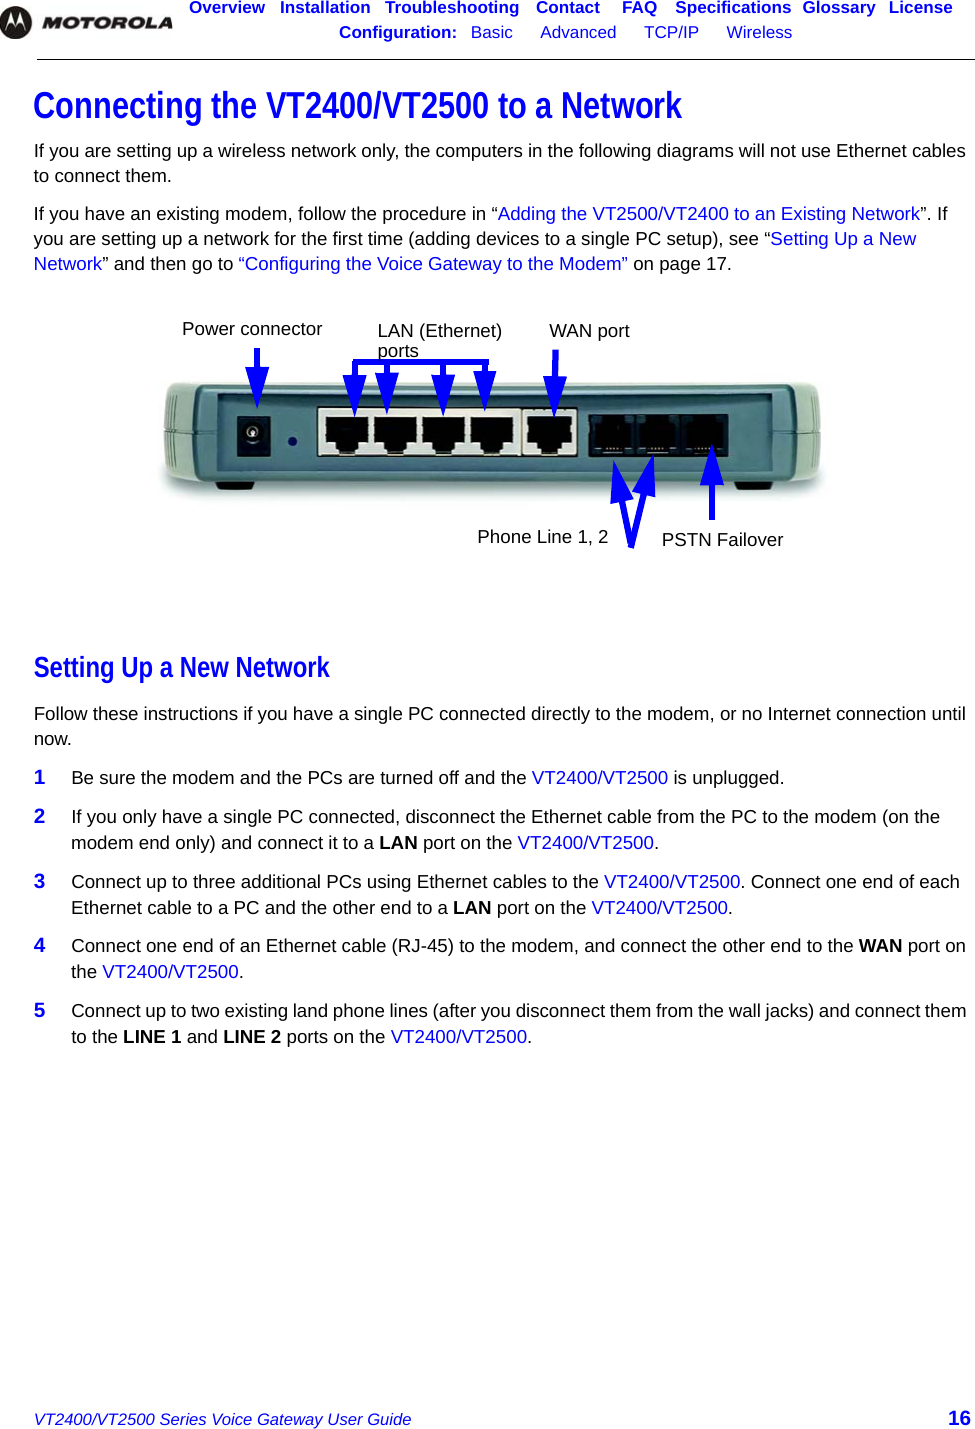 Overview Installation Troubleshooting Contact FAQ Specifications Glossary LicenseConfiguration:   Basic      Advanced      TCP/IP      Wireless    VT2400/VT2500 Series Voice Gateway User Guide 16Connecting the VT2400/VT2500 to a NetworkIf you are setting up a wireless network only, the computers in the following diagrams will not use Ethernet cables to connect them.If you have an existing modem, follow the procedure in “Adding the VT2500/VT2400 to an Existing Network”. If you are setting up a network for the first time (adding devices to a single PC setup), see “Setting Up a New Network” and then go to “Configuring the Voice Gateway to the Modem” on page 17.Setting Up a New NetworkFollow these instructions if you have a single PC connected directly to the modem, or no Internet connection until now.1Be sure the modem and the PCs are turned off and the VT2400/VT2500 is unplugged. 2If you only have a single PC connected, disconnect the Ethernet cable from the PC to the modem (on the modem end only) and connect it to a LAN port on the VT2400/VT2500. 3Connect up to three additional PCs using Ethernet cables to the VT2400/VT2500. Connect one end of each Ethernet cable to a PC and the other end to a LAN port on the VT2400/VT2500.4Connect one end of an Ethernet cable (RJ-45) to the modem, and connect the other end to the WAN port on the VT2400/VT2500.5Connect up to two existing land phone lines (after you disconnect them from the wall jacks) and connect them to the LINE 1 and LINE 2 ports on the VT2400/VT2500.Power connector LAN (Ethernet)  WAN portPhone Line 1, 2 PSTN Failoverports